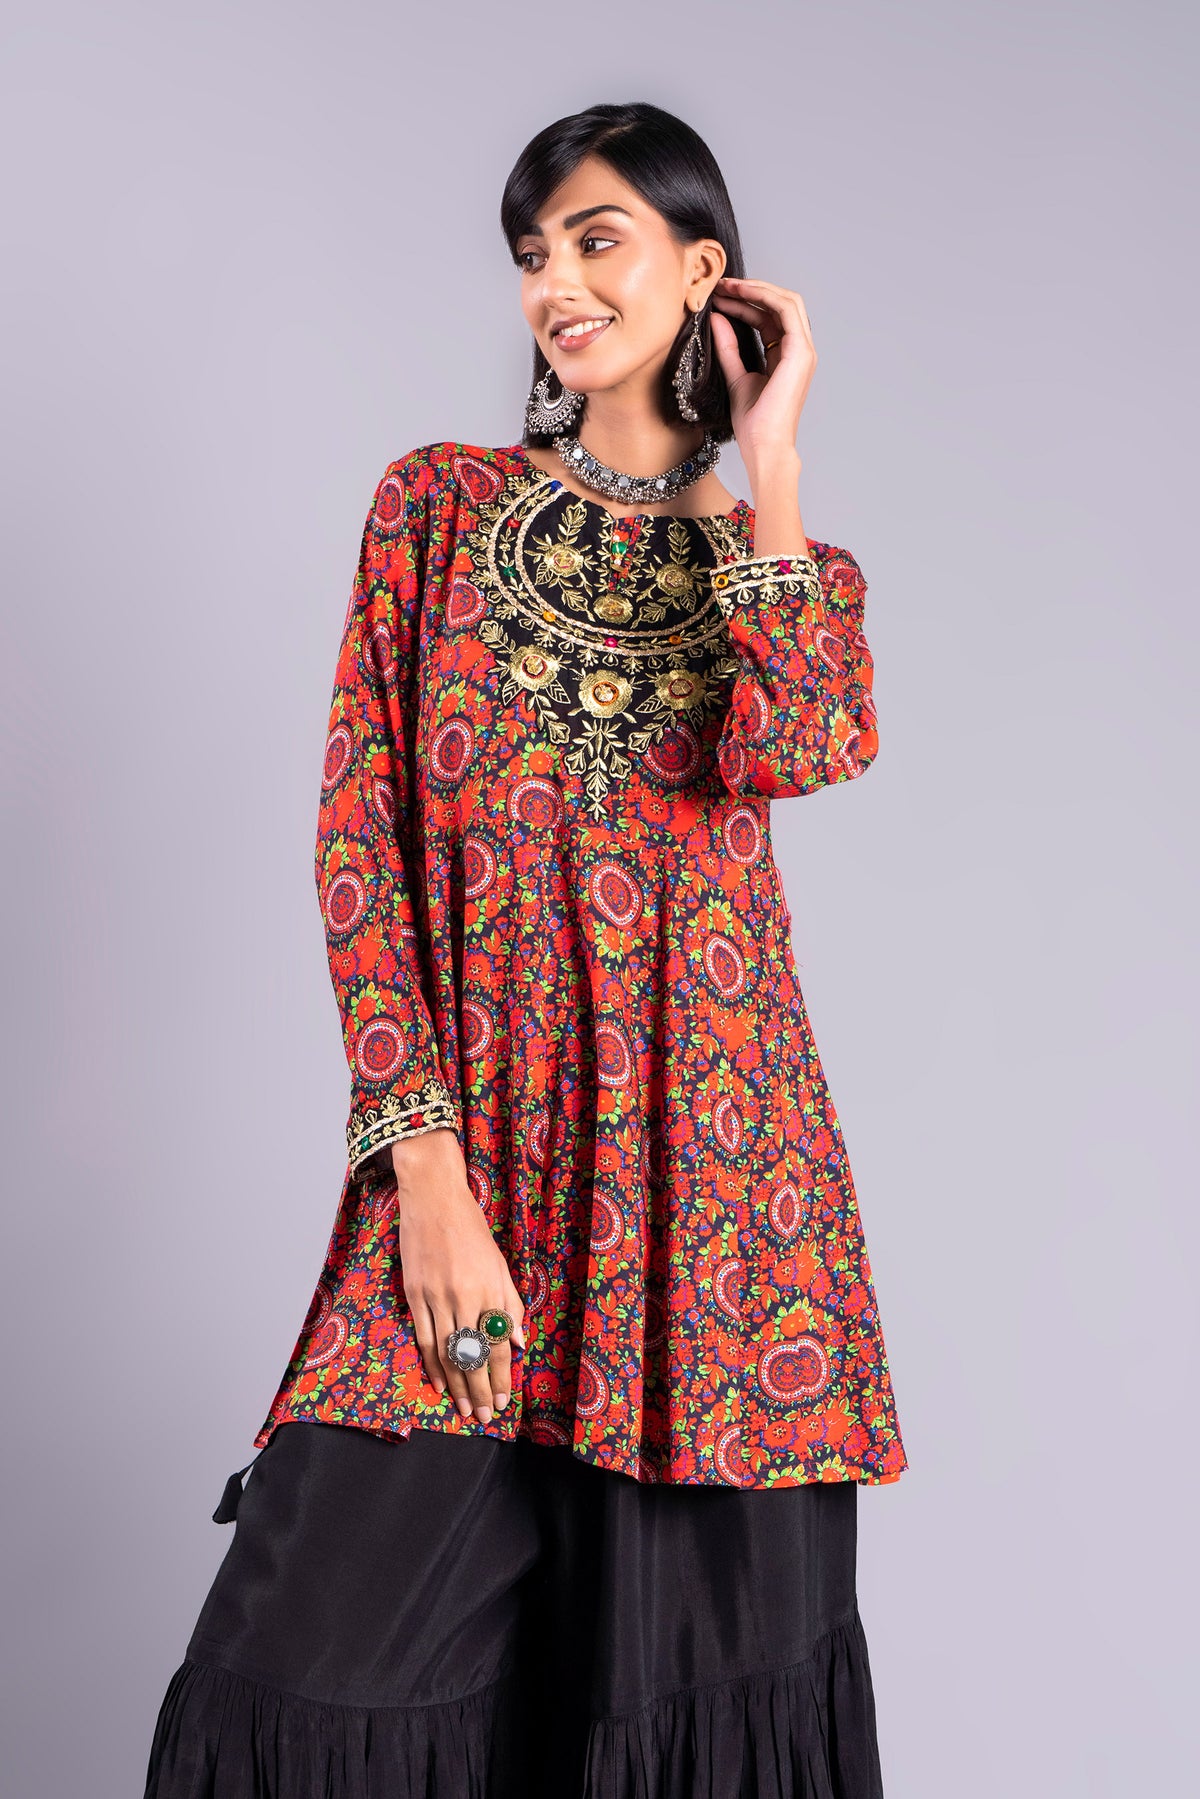 Black Patch Sl in Multi coloured Printed Lawn fabric